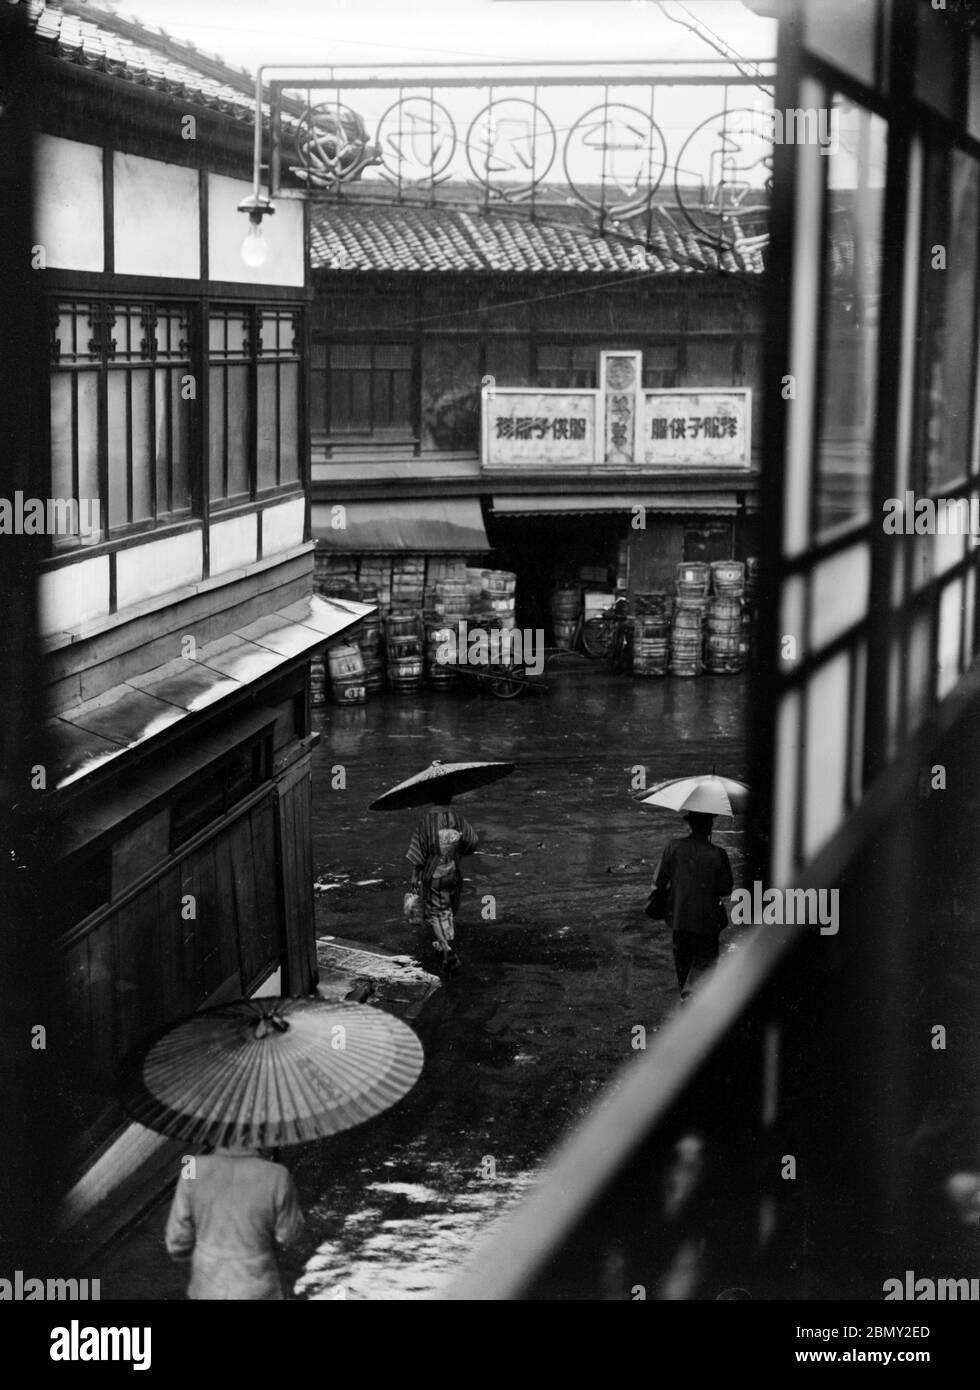 [ 1930s Japan - Backstreet View ] —   View from a second storey backstreet room during a rainy day somewhere in Japan. Two people with Japanese paper parasols and one person with a Western umbrella are walking down the street. In the back a shop can be seen.  20th century vintage glass negative. Stock Photo